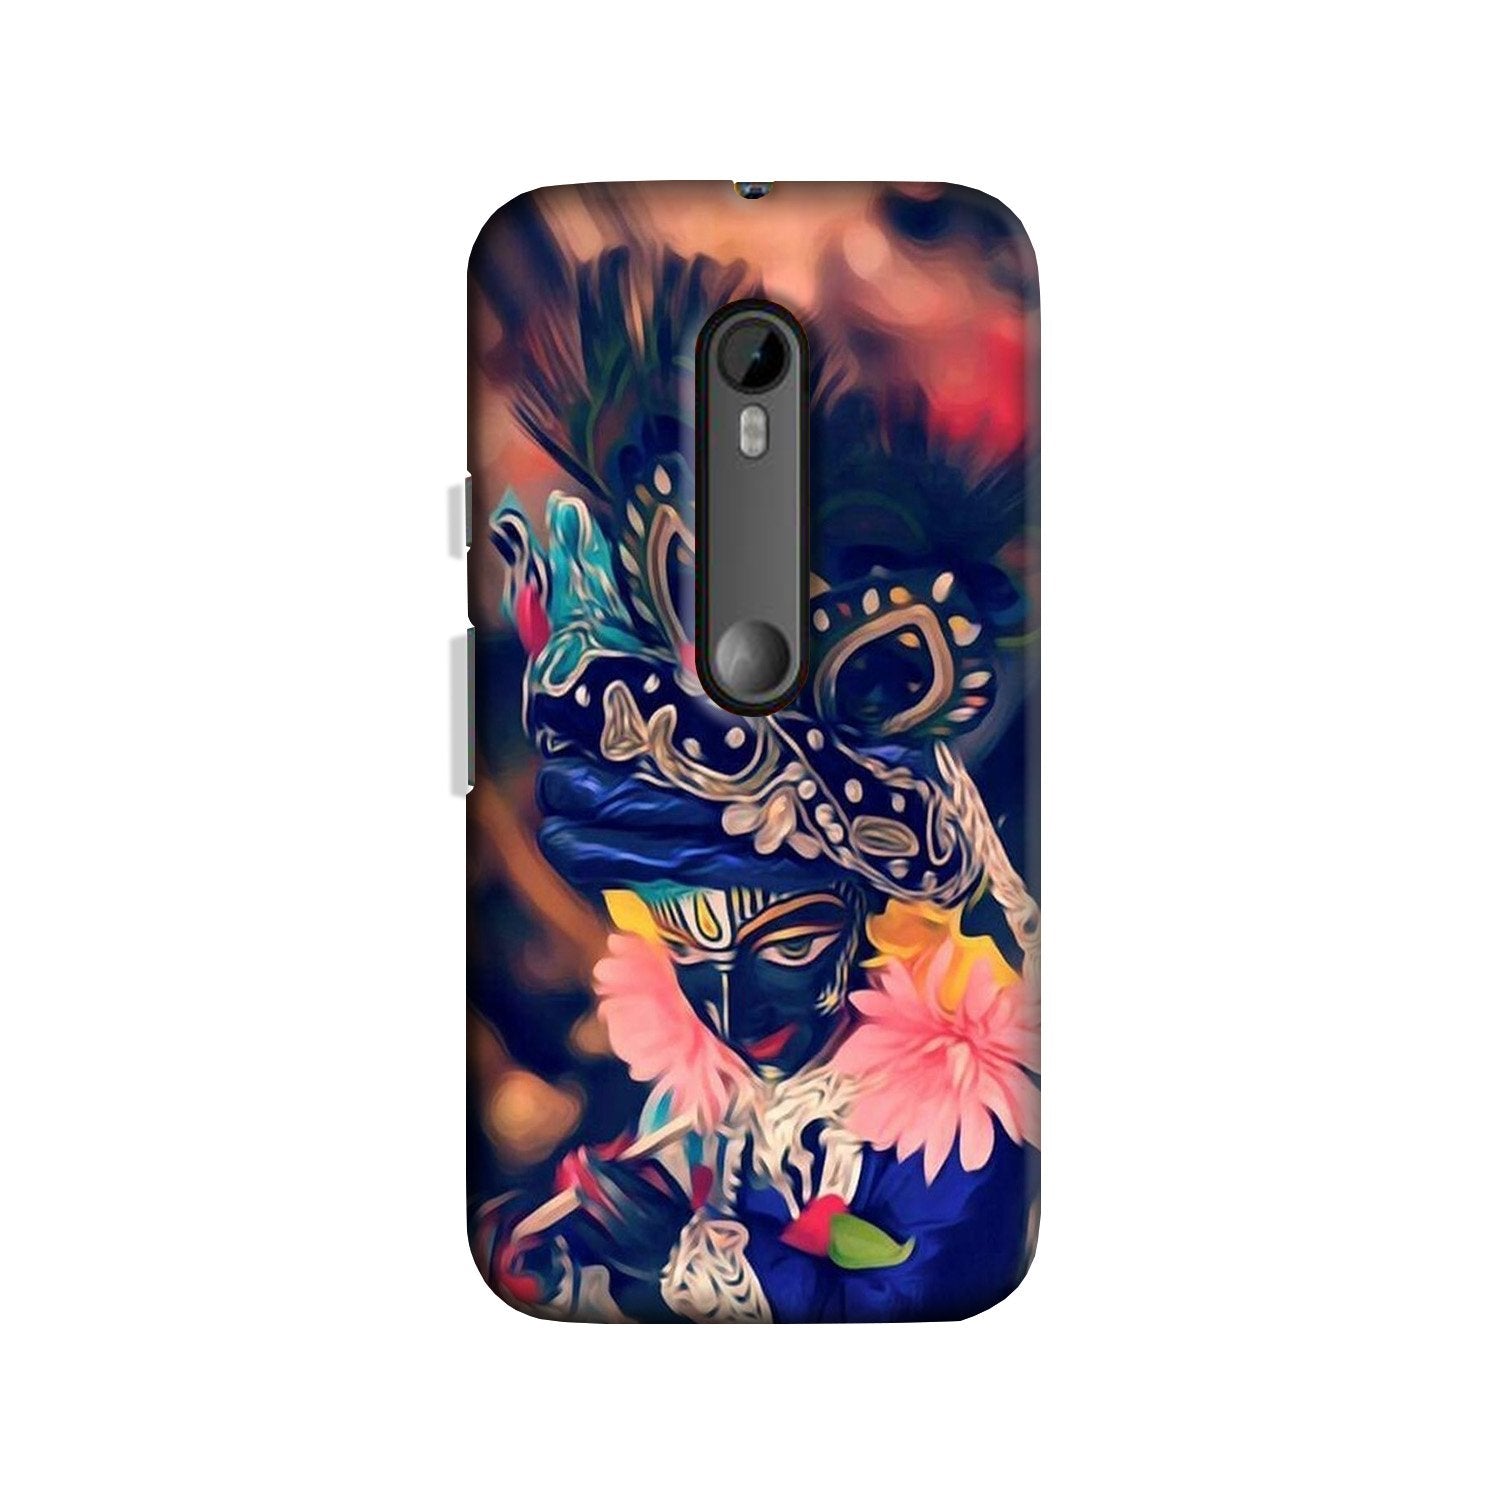 Lord Krishna Case for Moto X Style